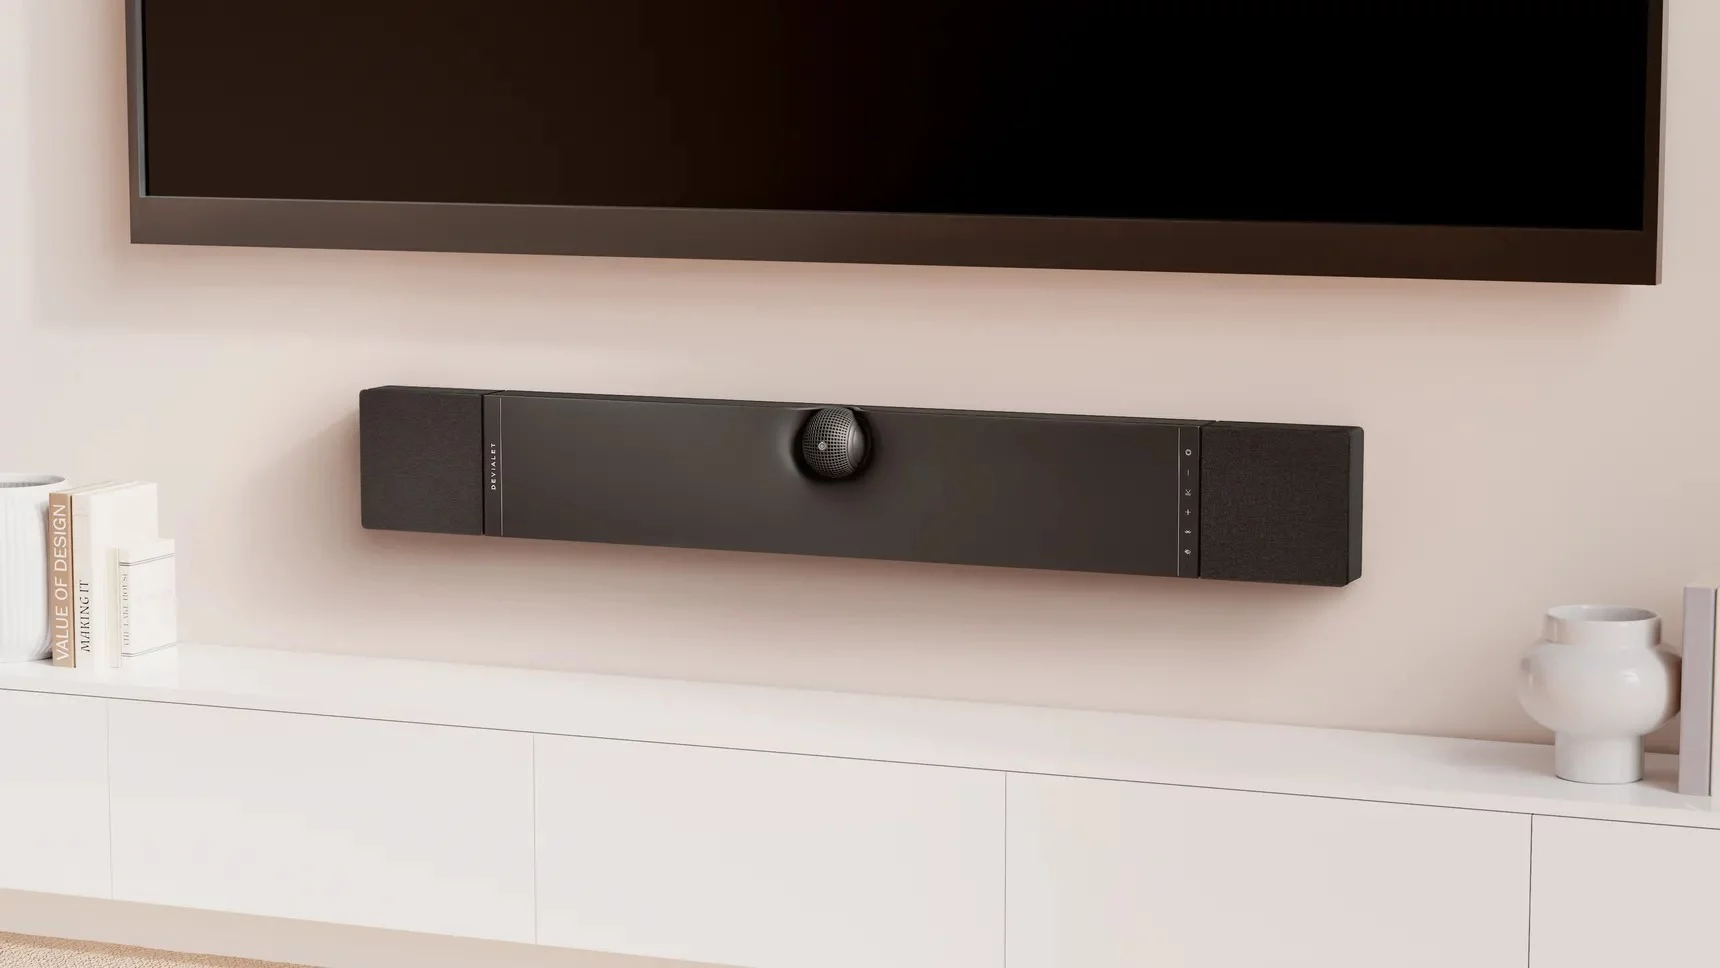 Copy of Devialet Dione HD wall m